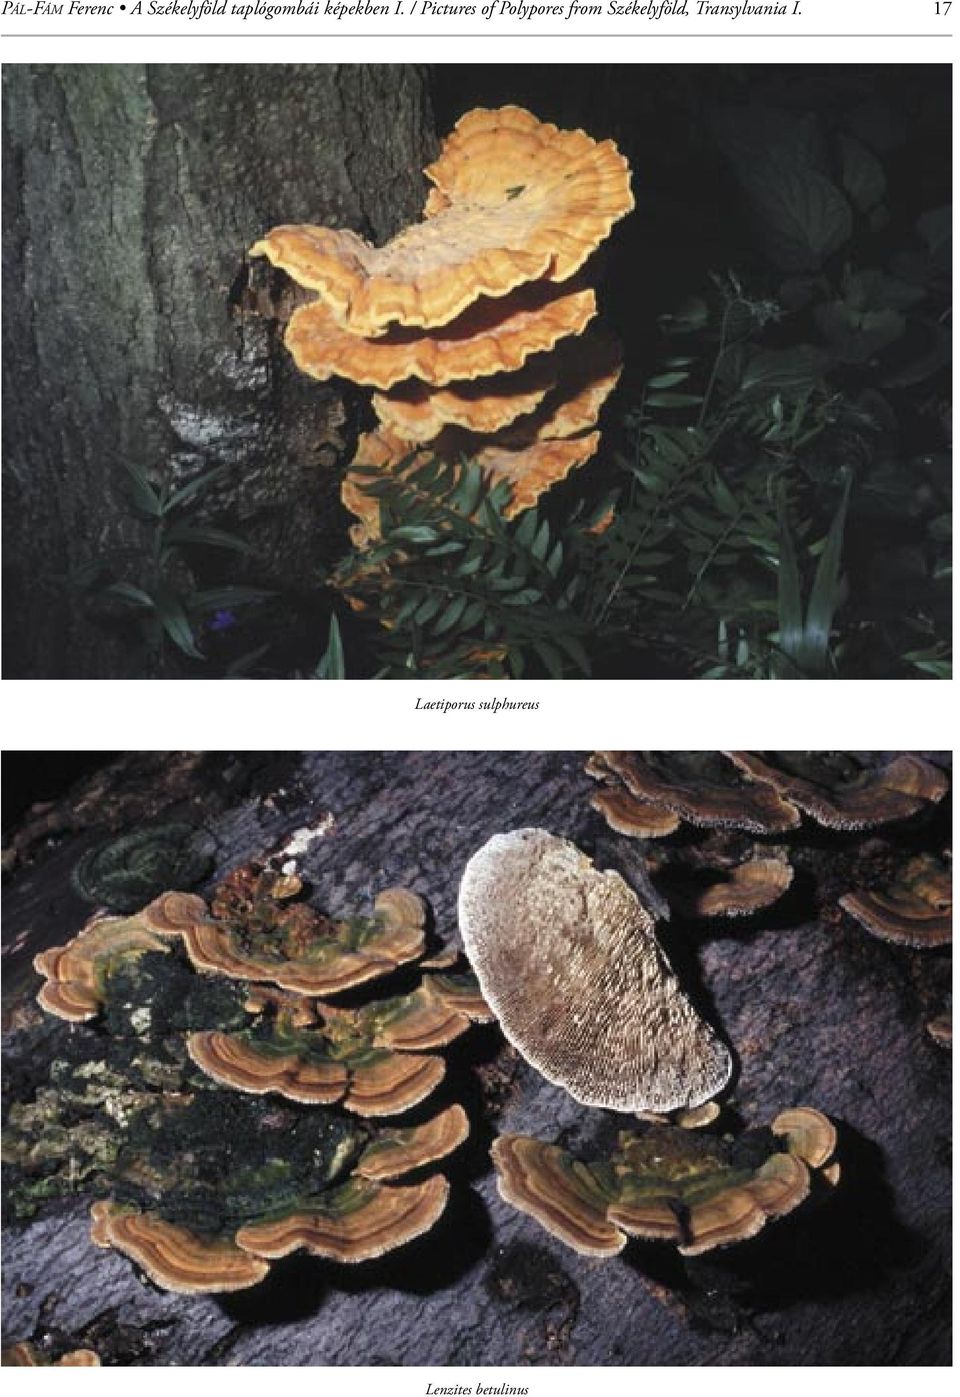 / Pictures of Polypores from